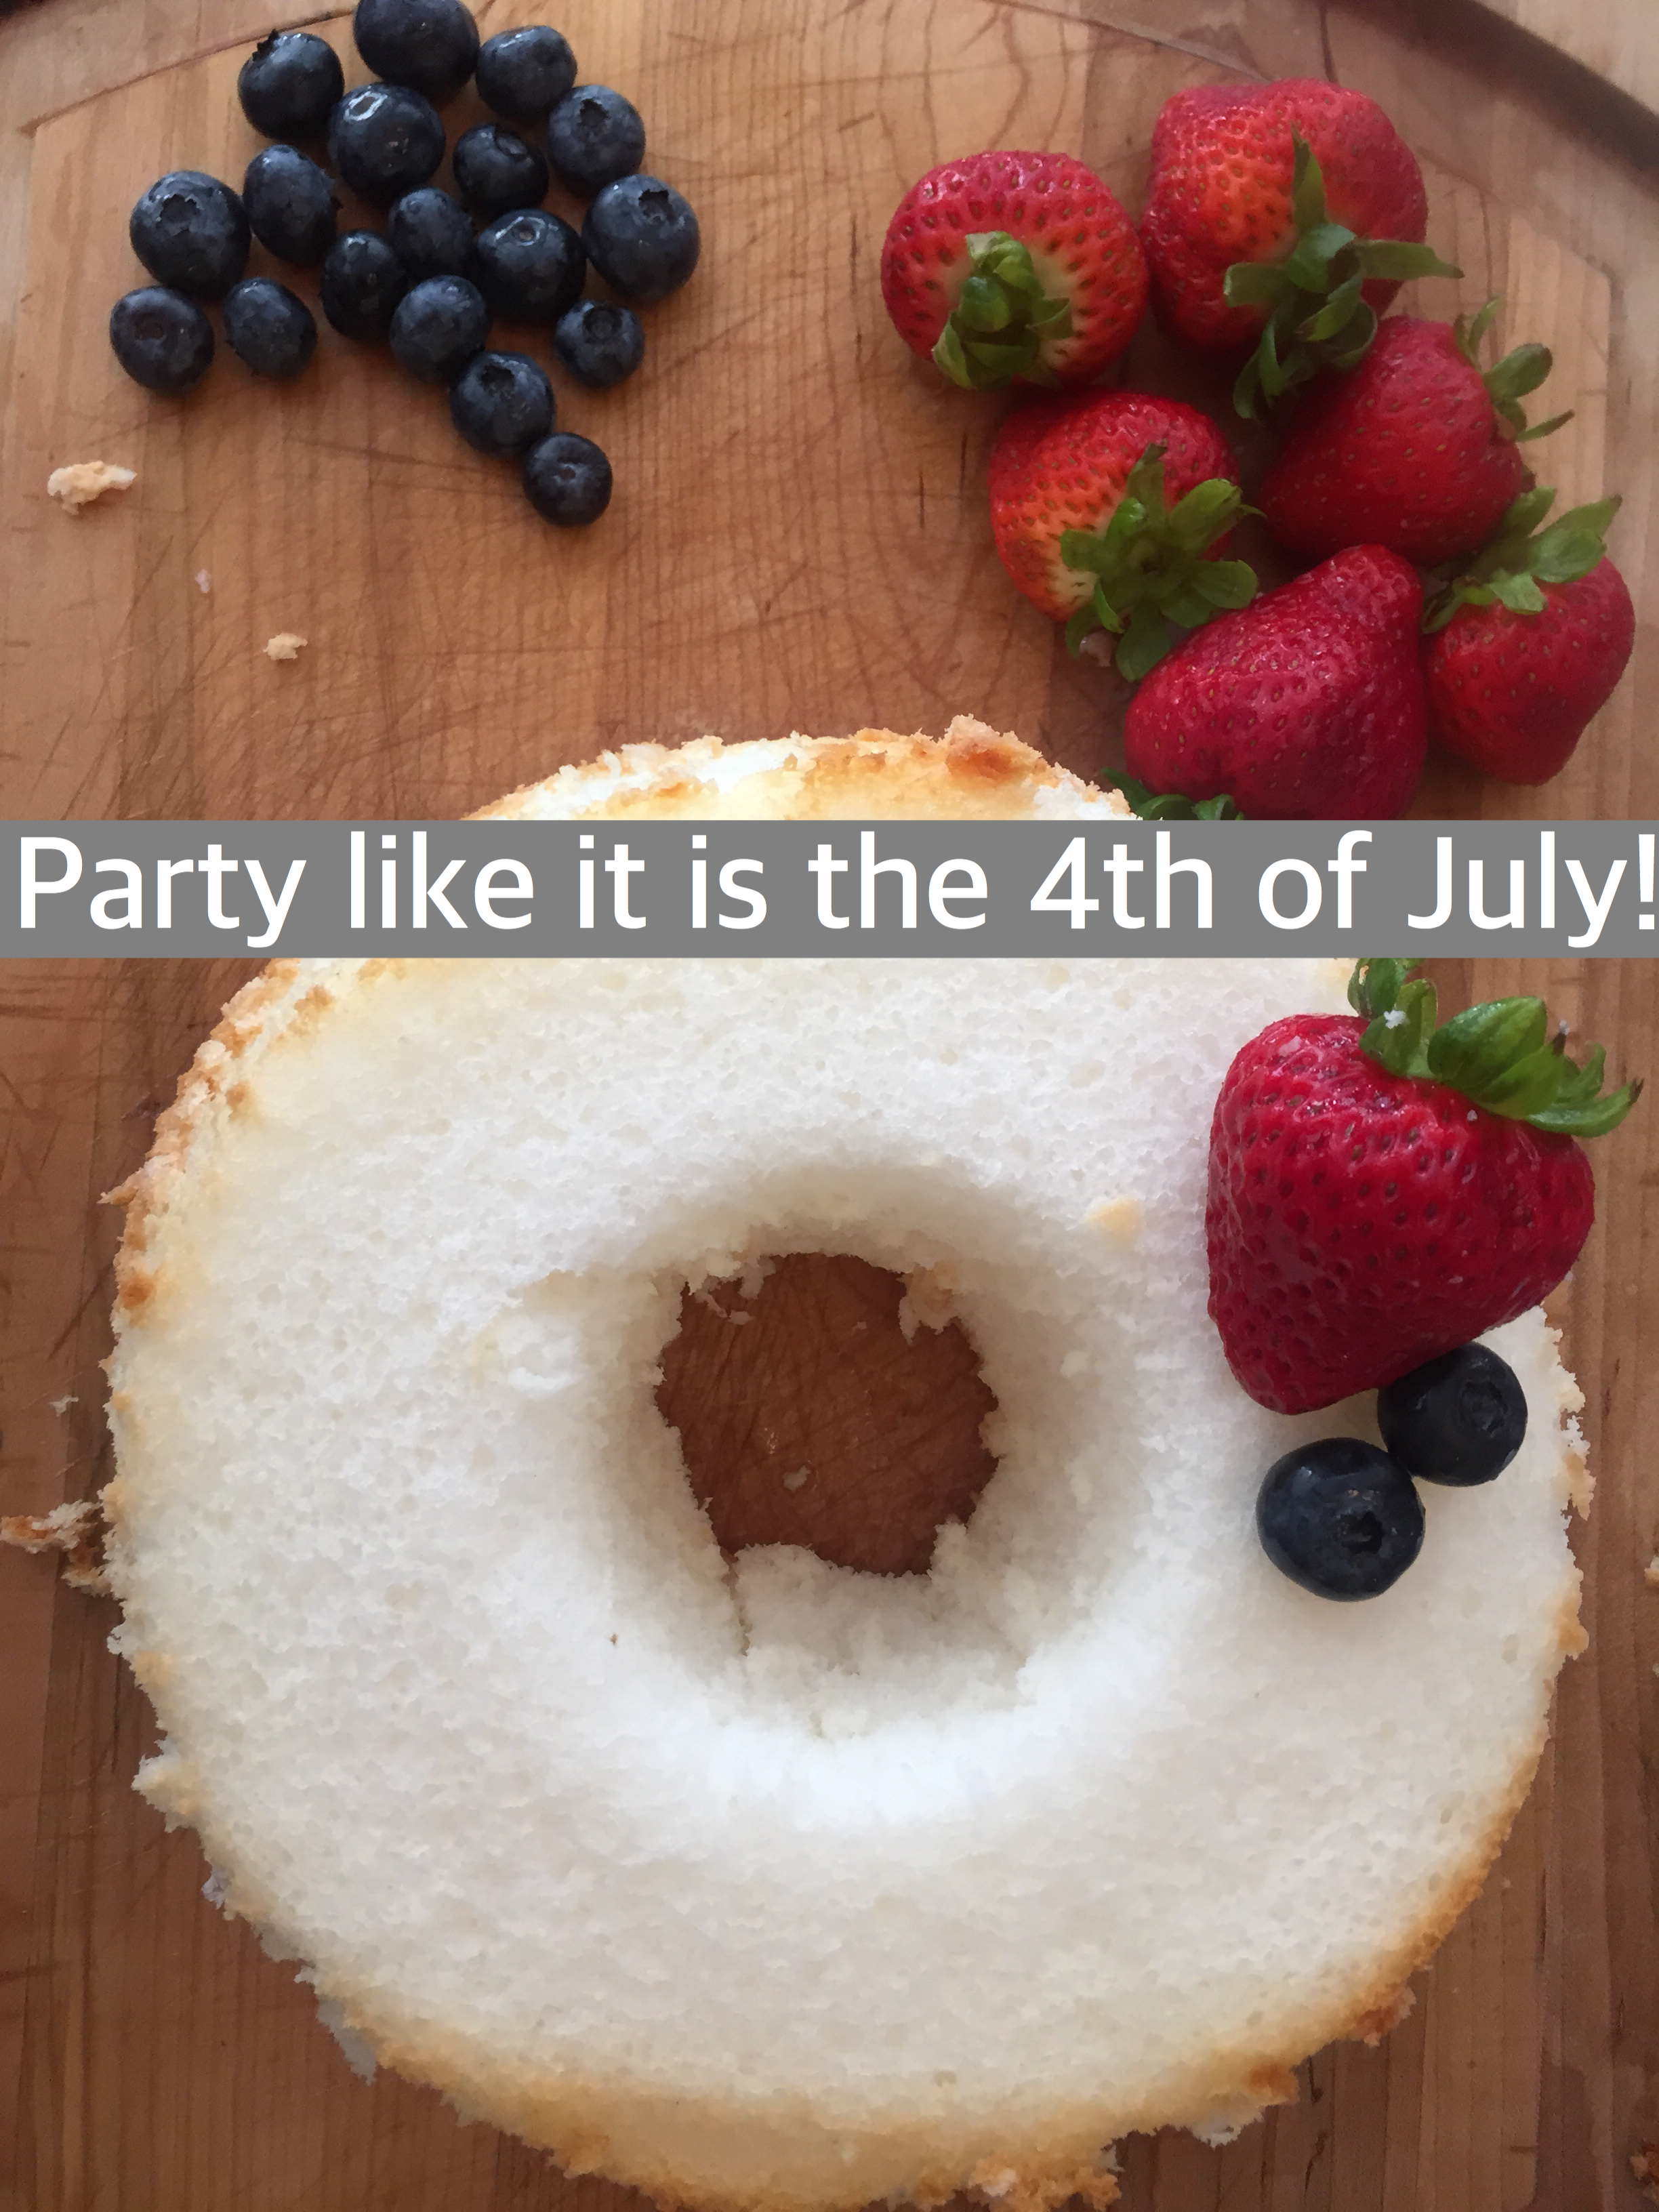 Party like it is 4th of July by Happy Family Blog